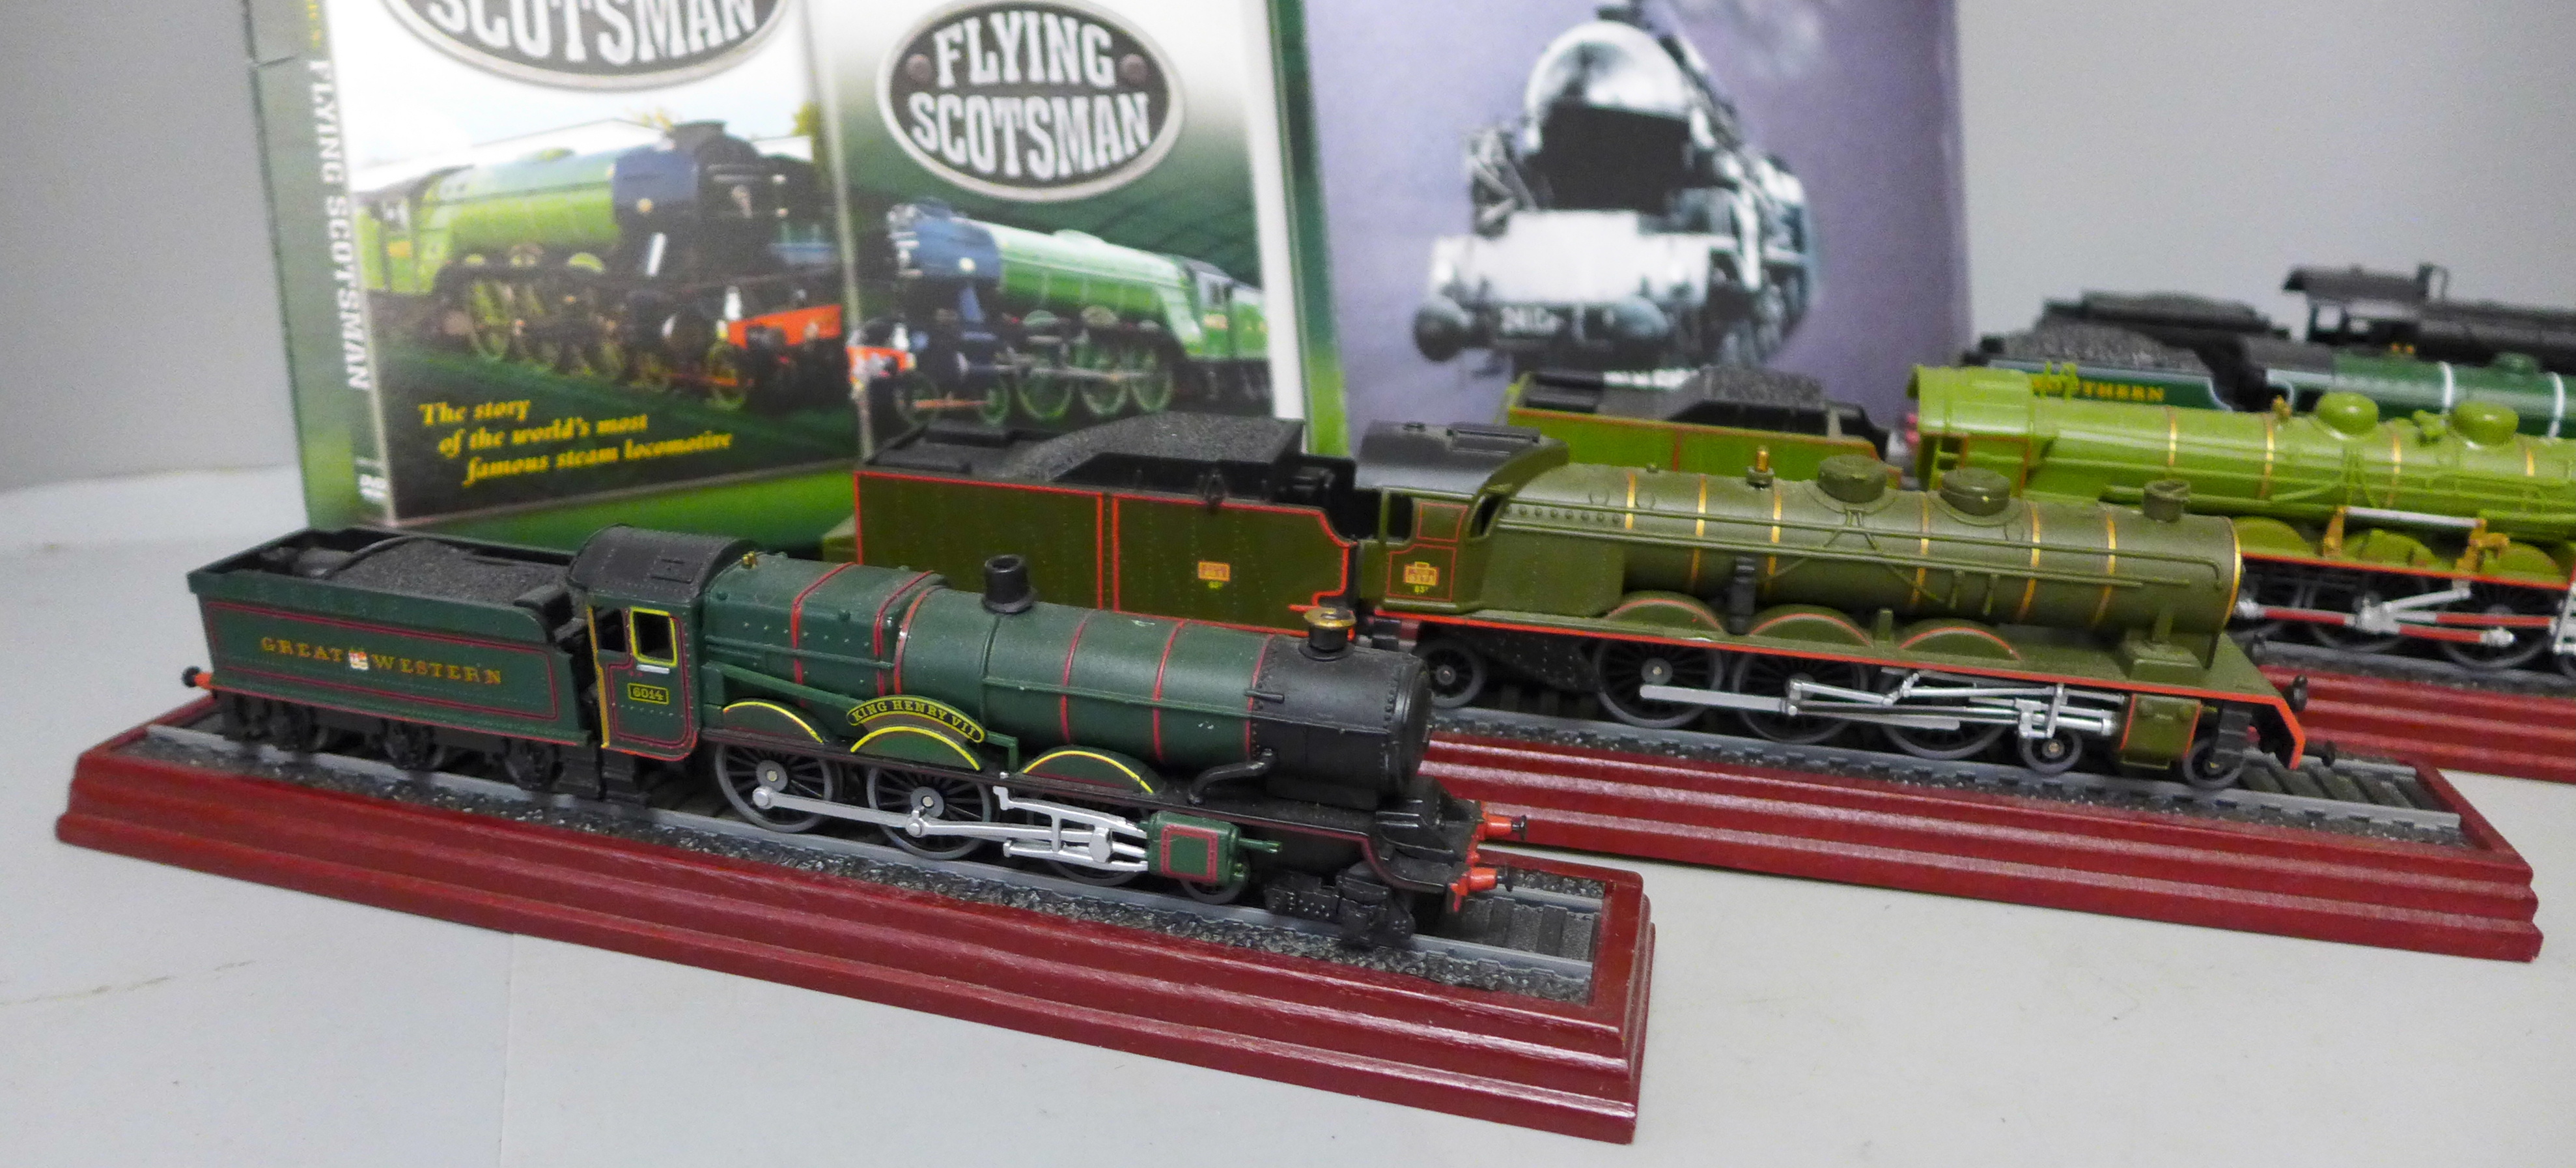 Six models of steam locomotives on wooden plinths and a Flying Scotsman DVD and book set - Image 2 of 3